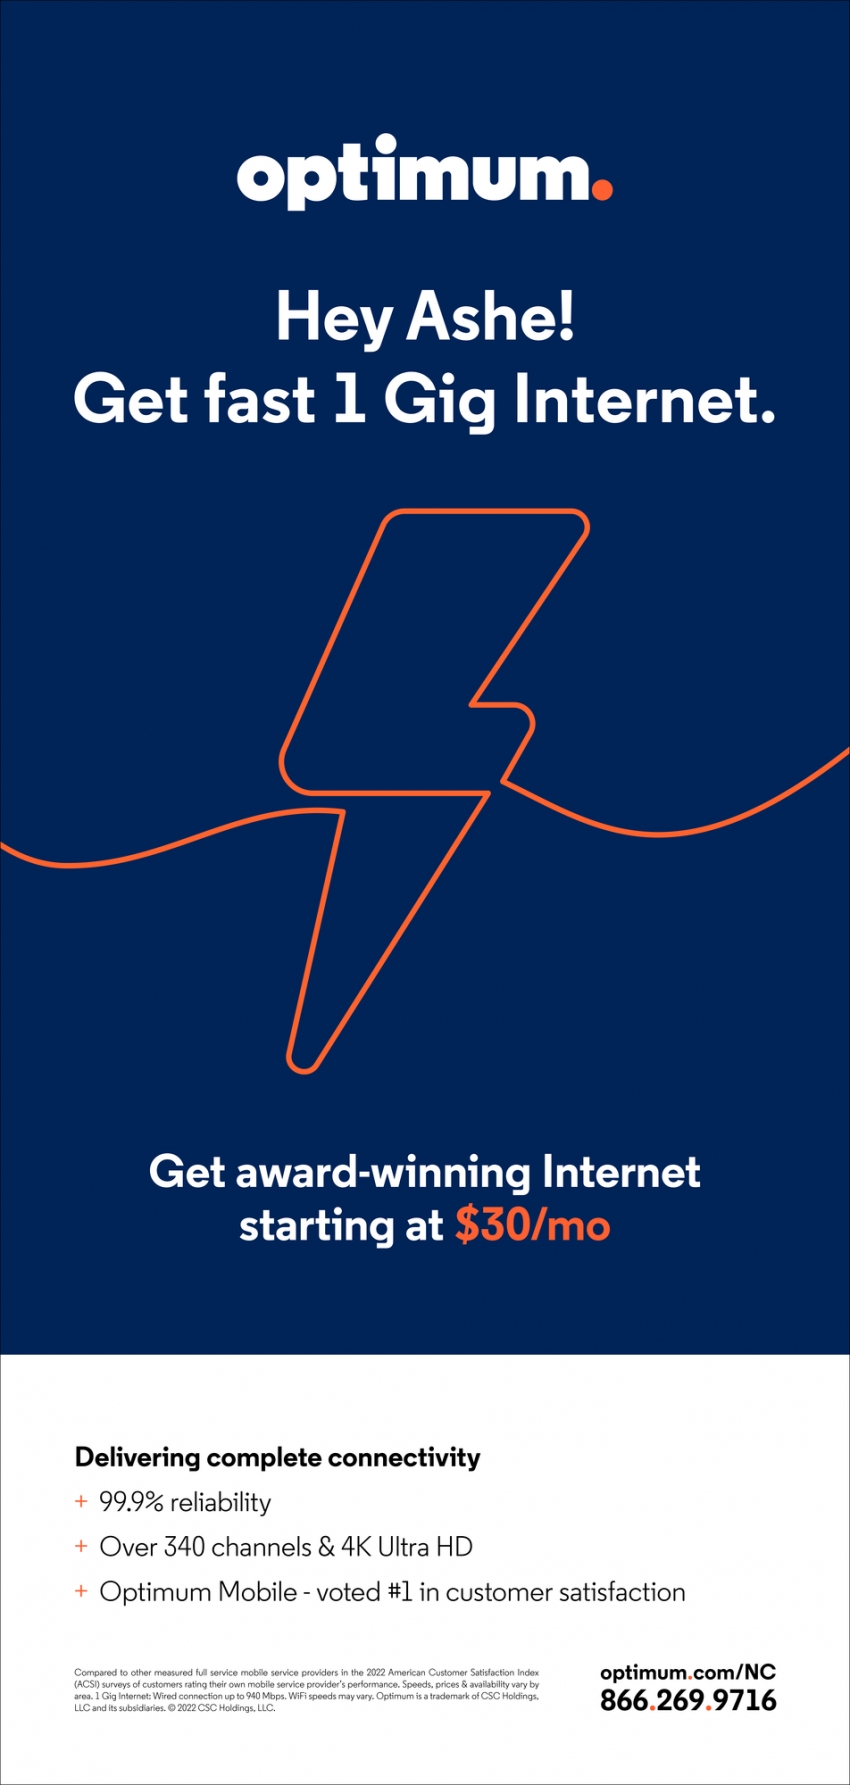 Get Closer and Go Farther With Fast Internet From Optimum